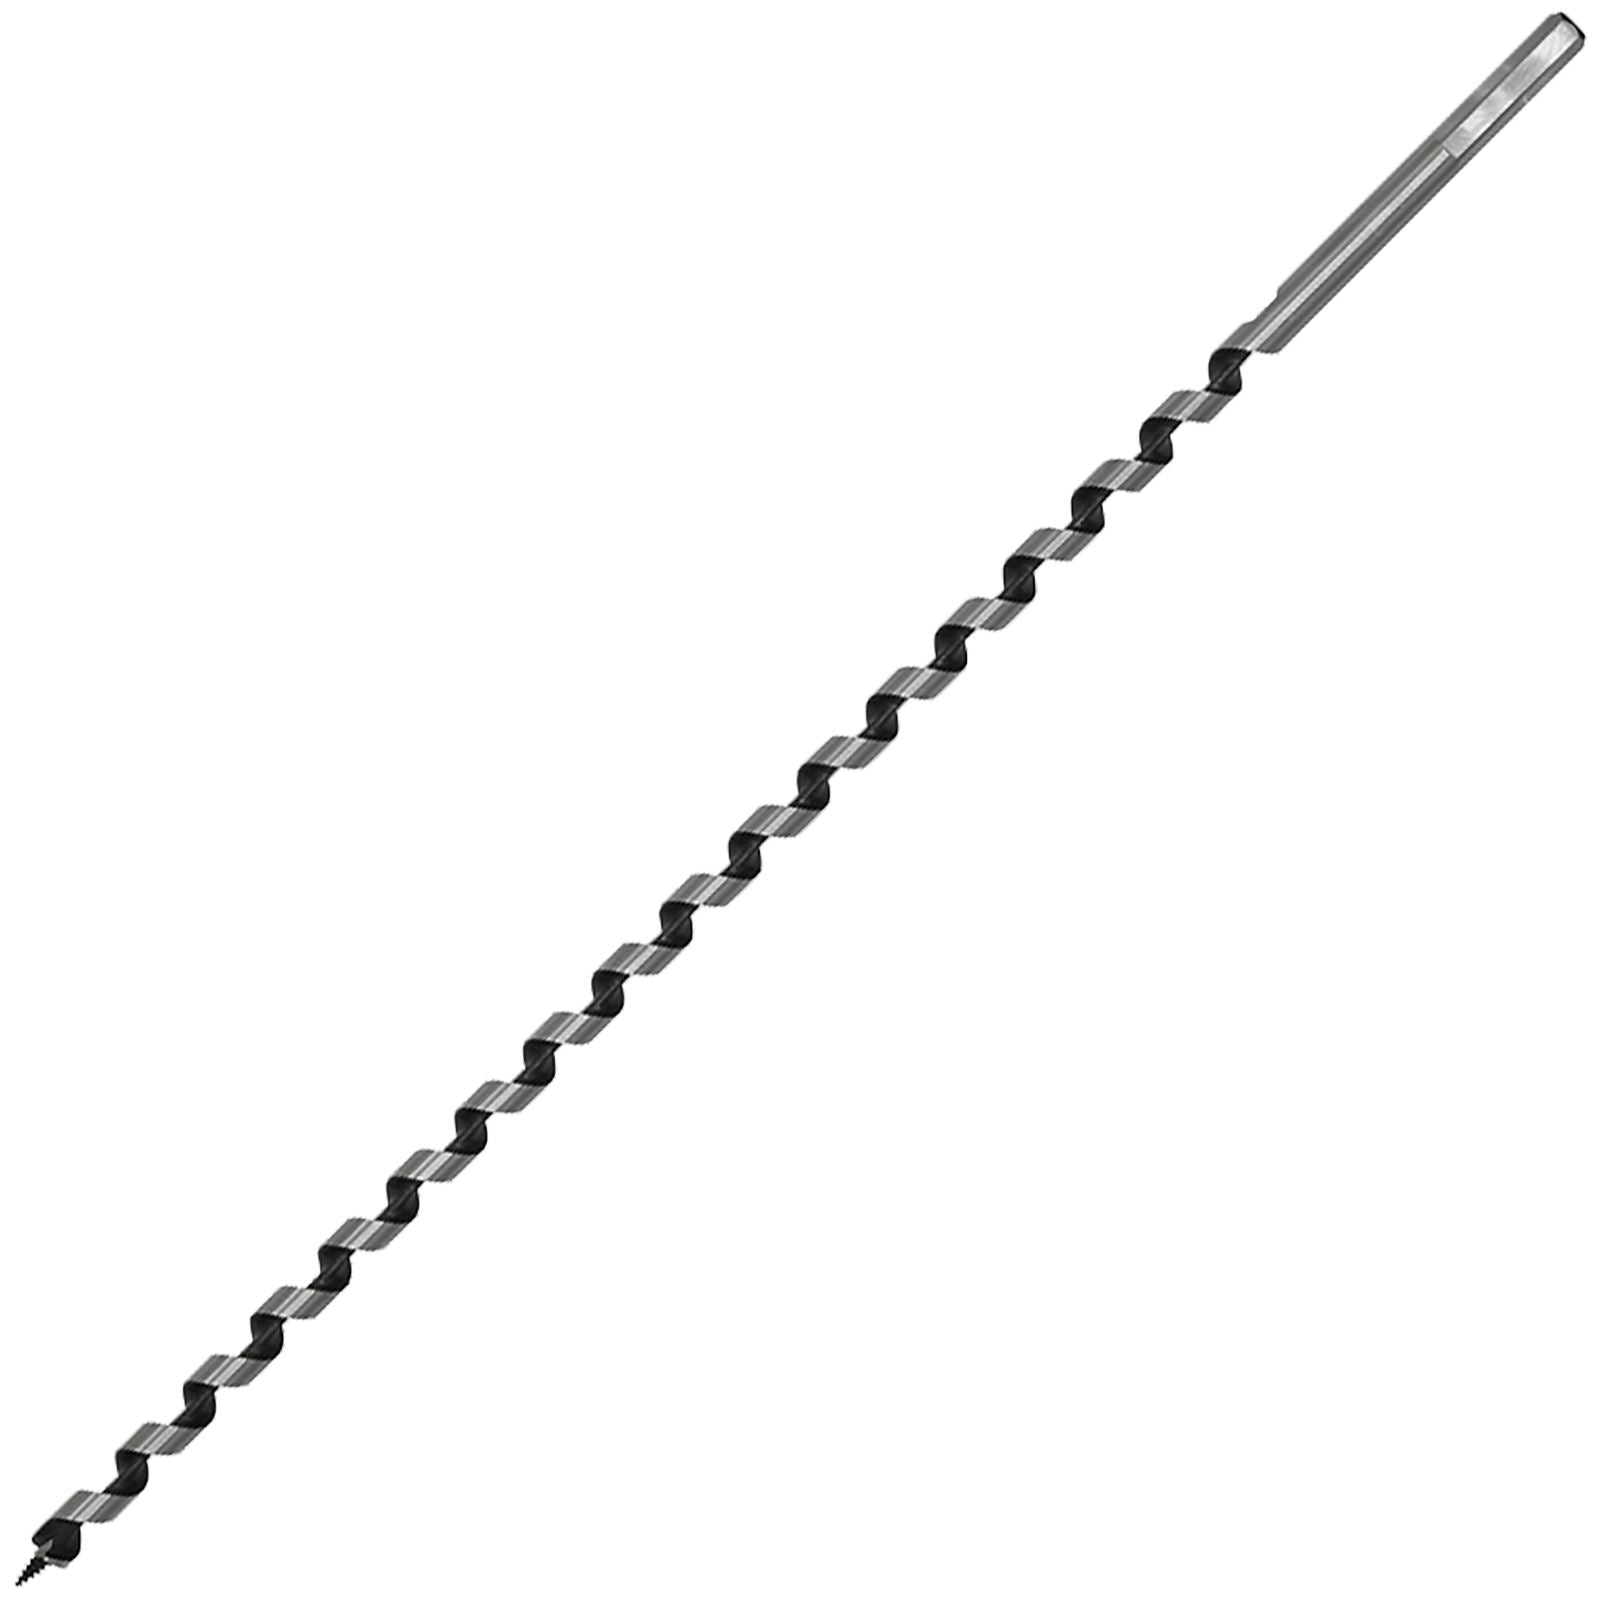 Worksafe by Sealey Auger Wood Drill Bit 10mm x 460mm